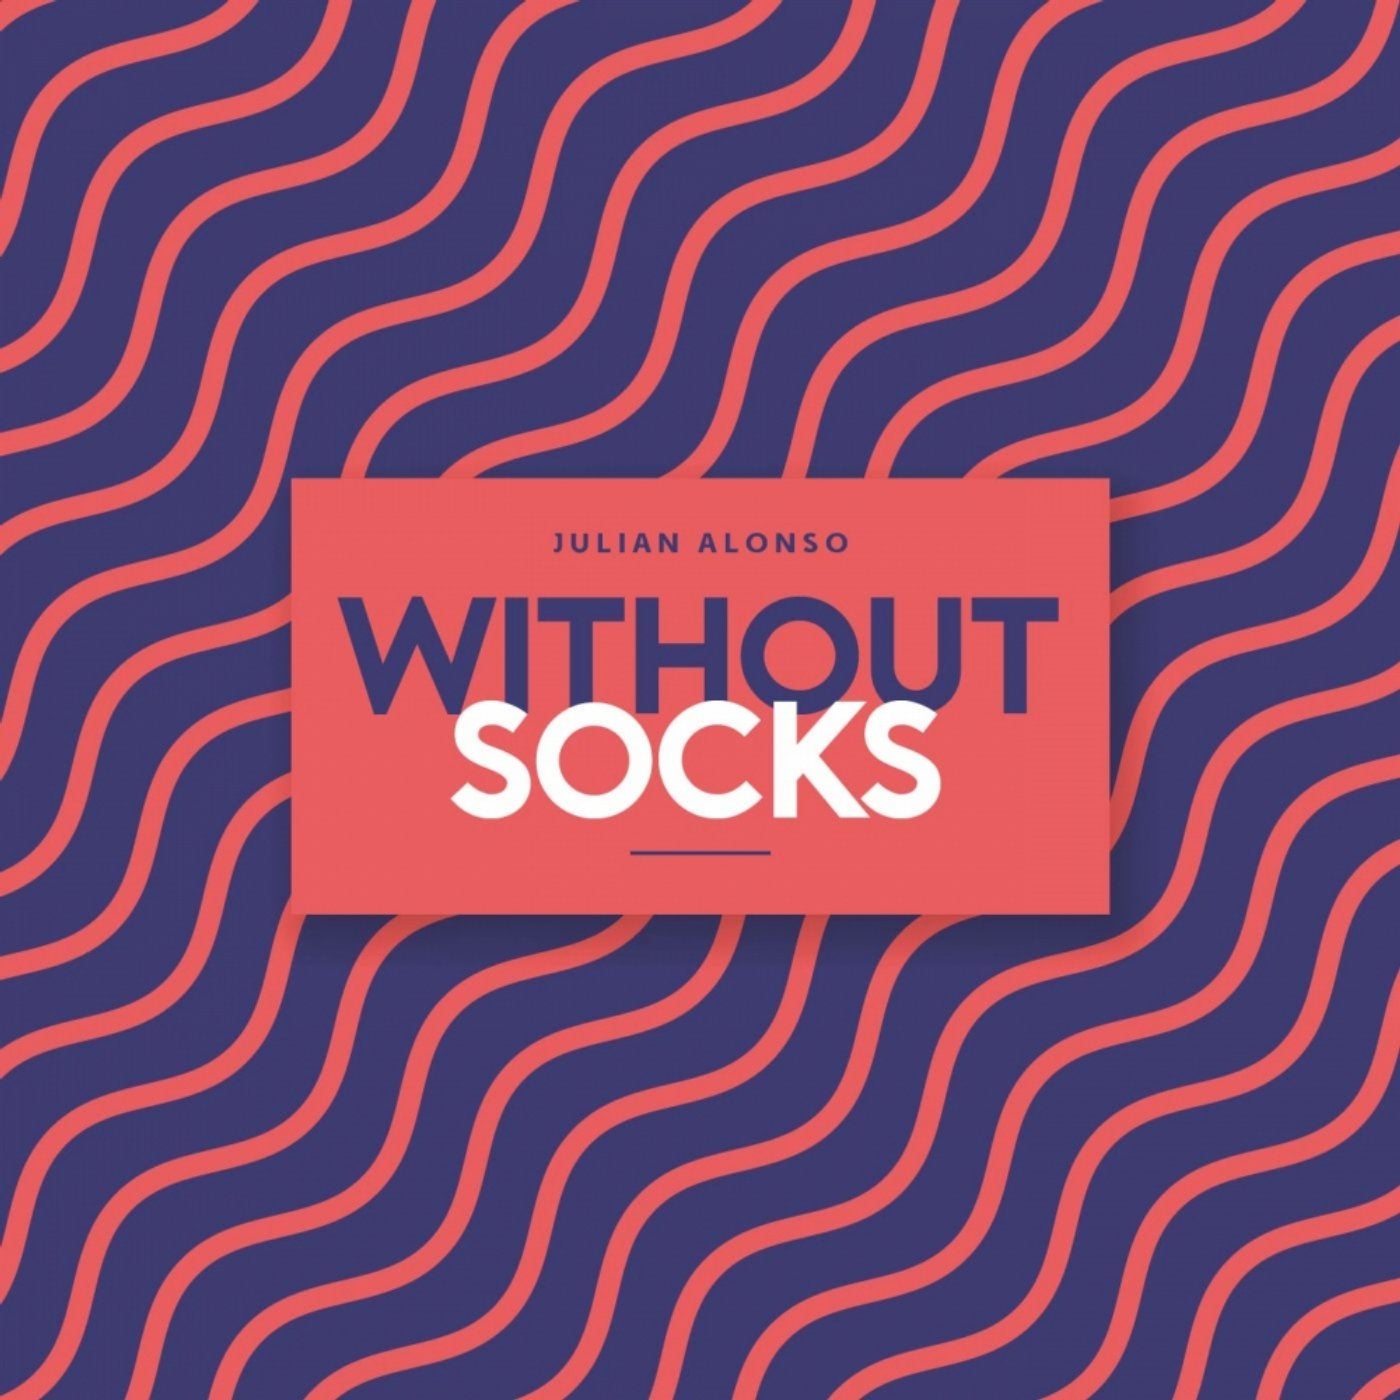 Without Socks